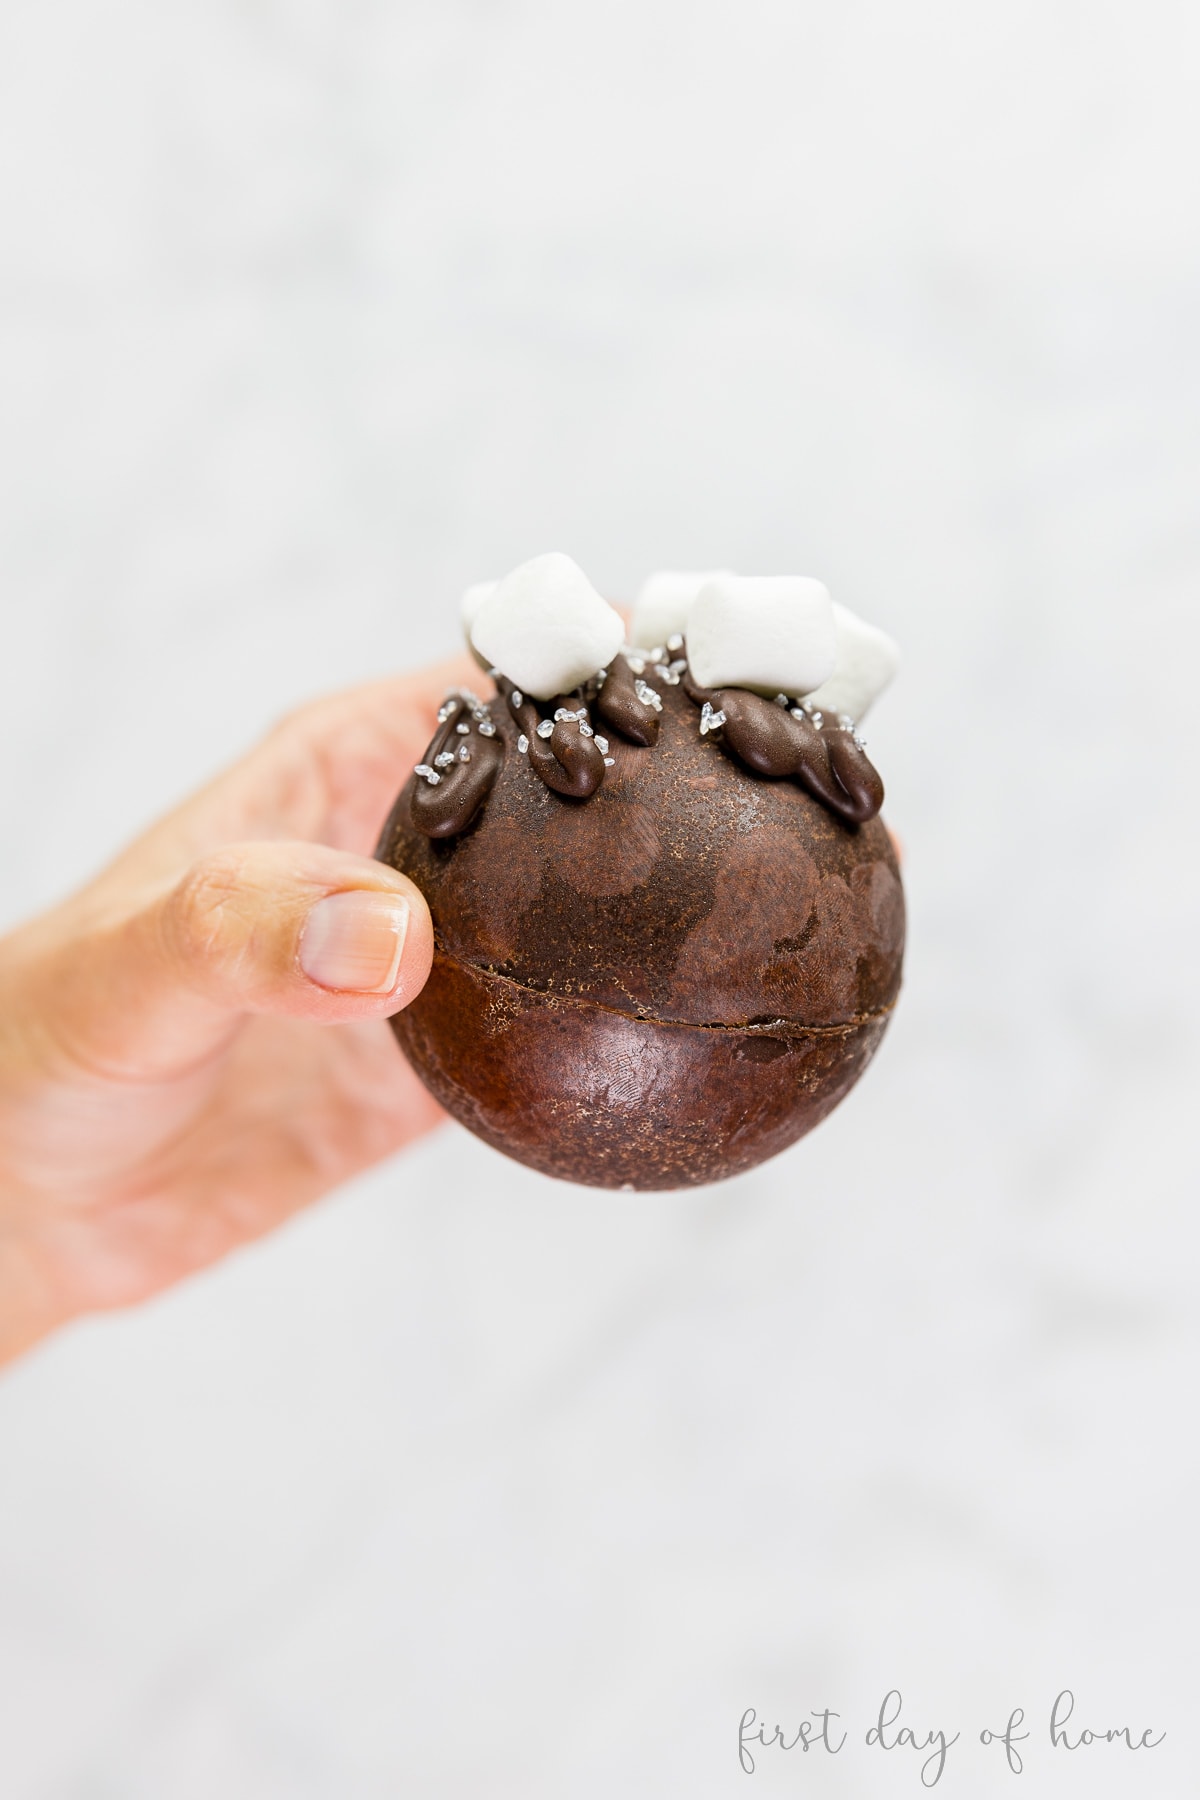 Hot chocolate bomb with bloom imperfections